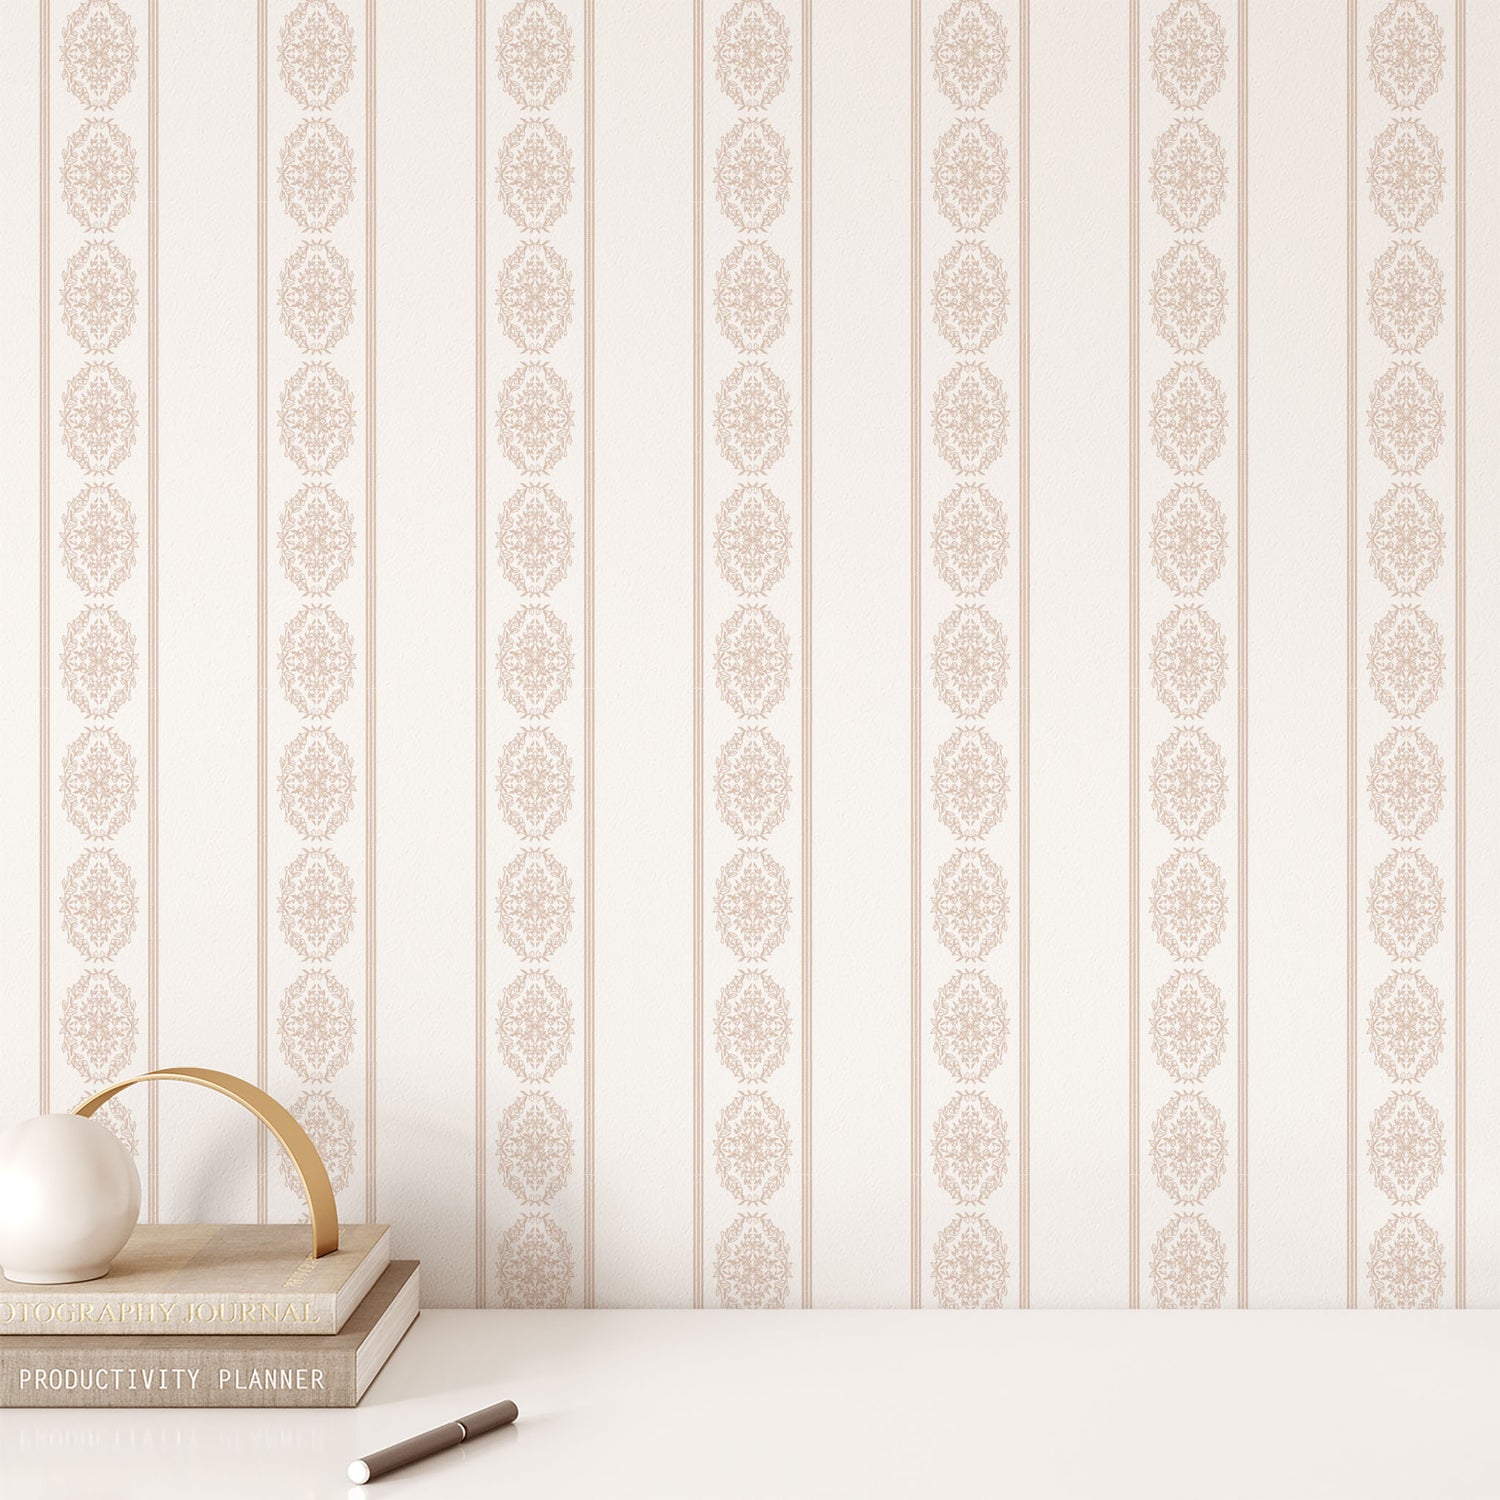 Made with top-quality materials, this wallpaper is the perfect choice for adding a touch of elegance to your space shown in full size image.